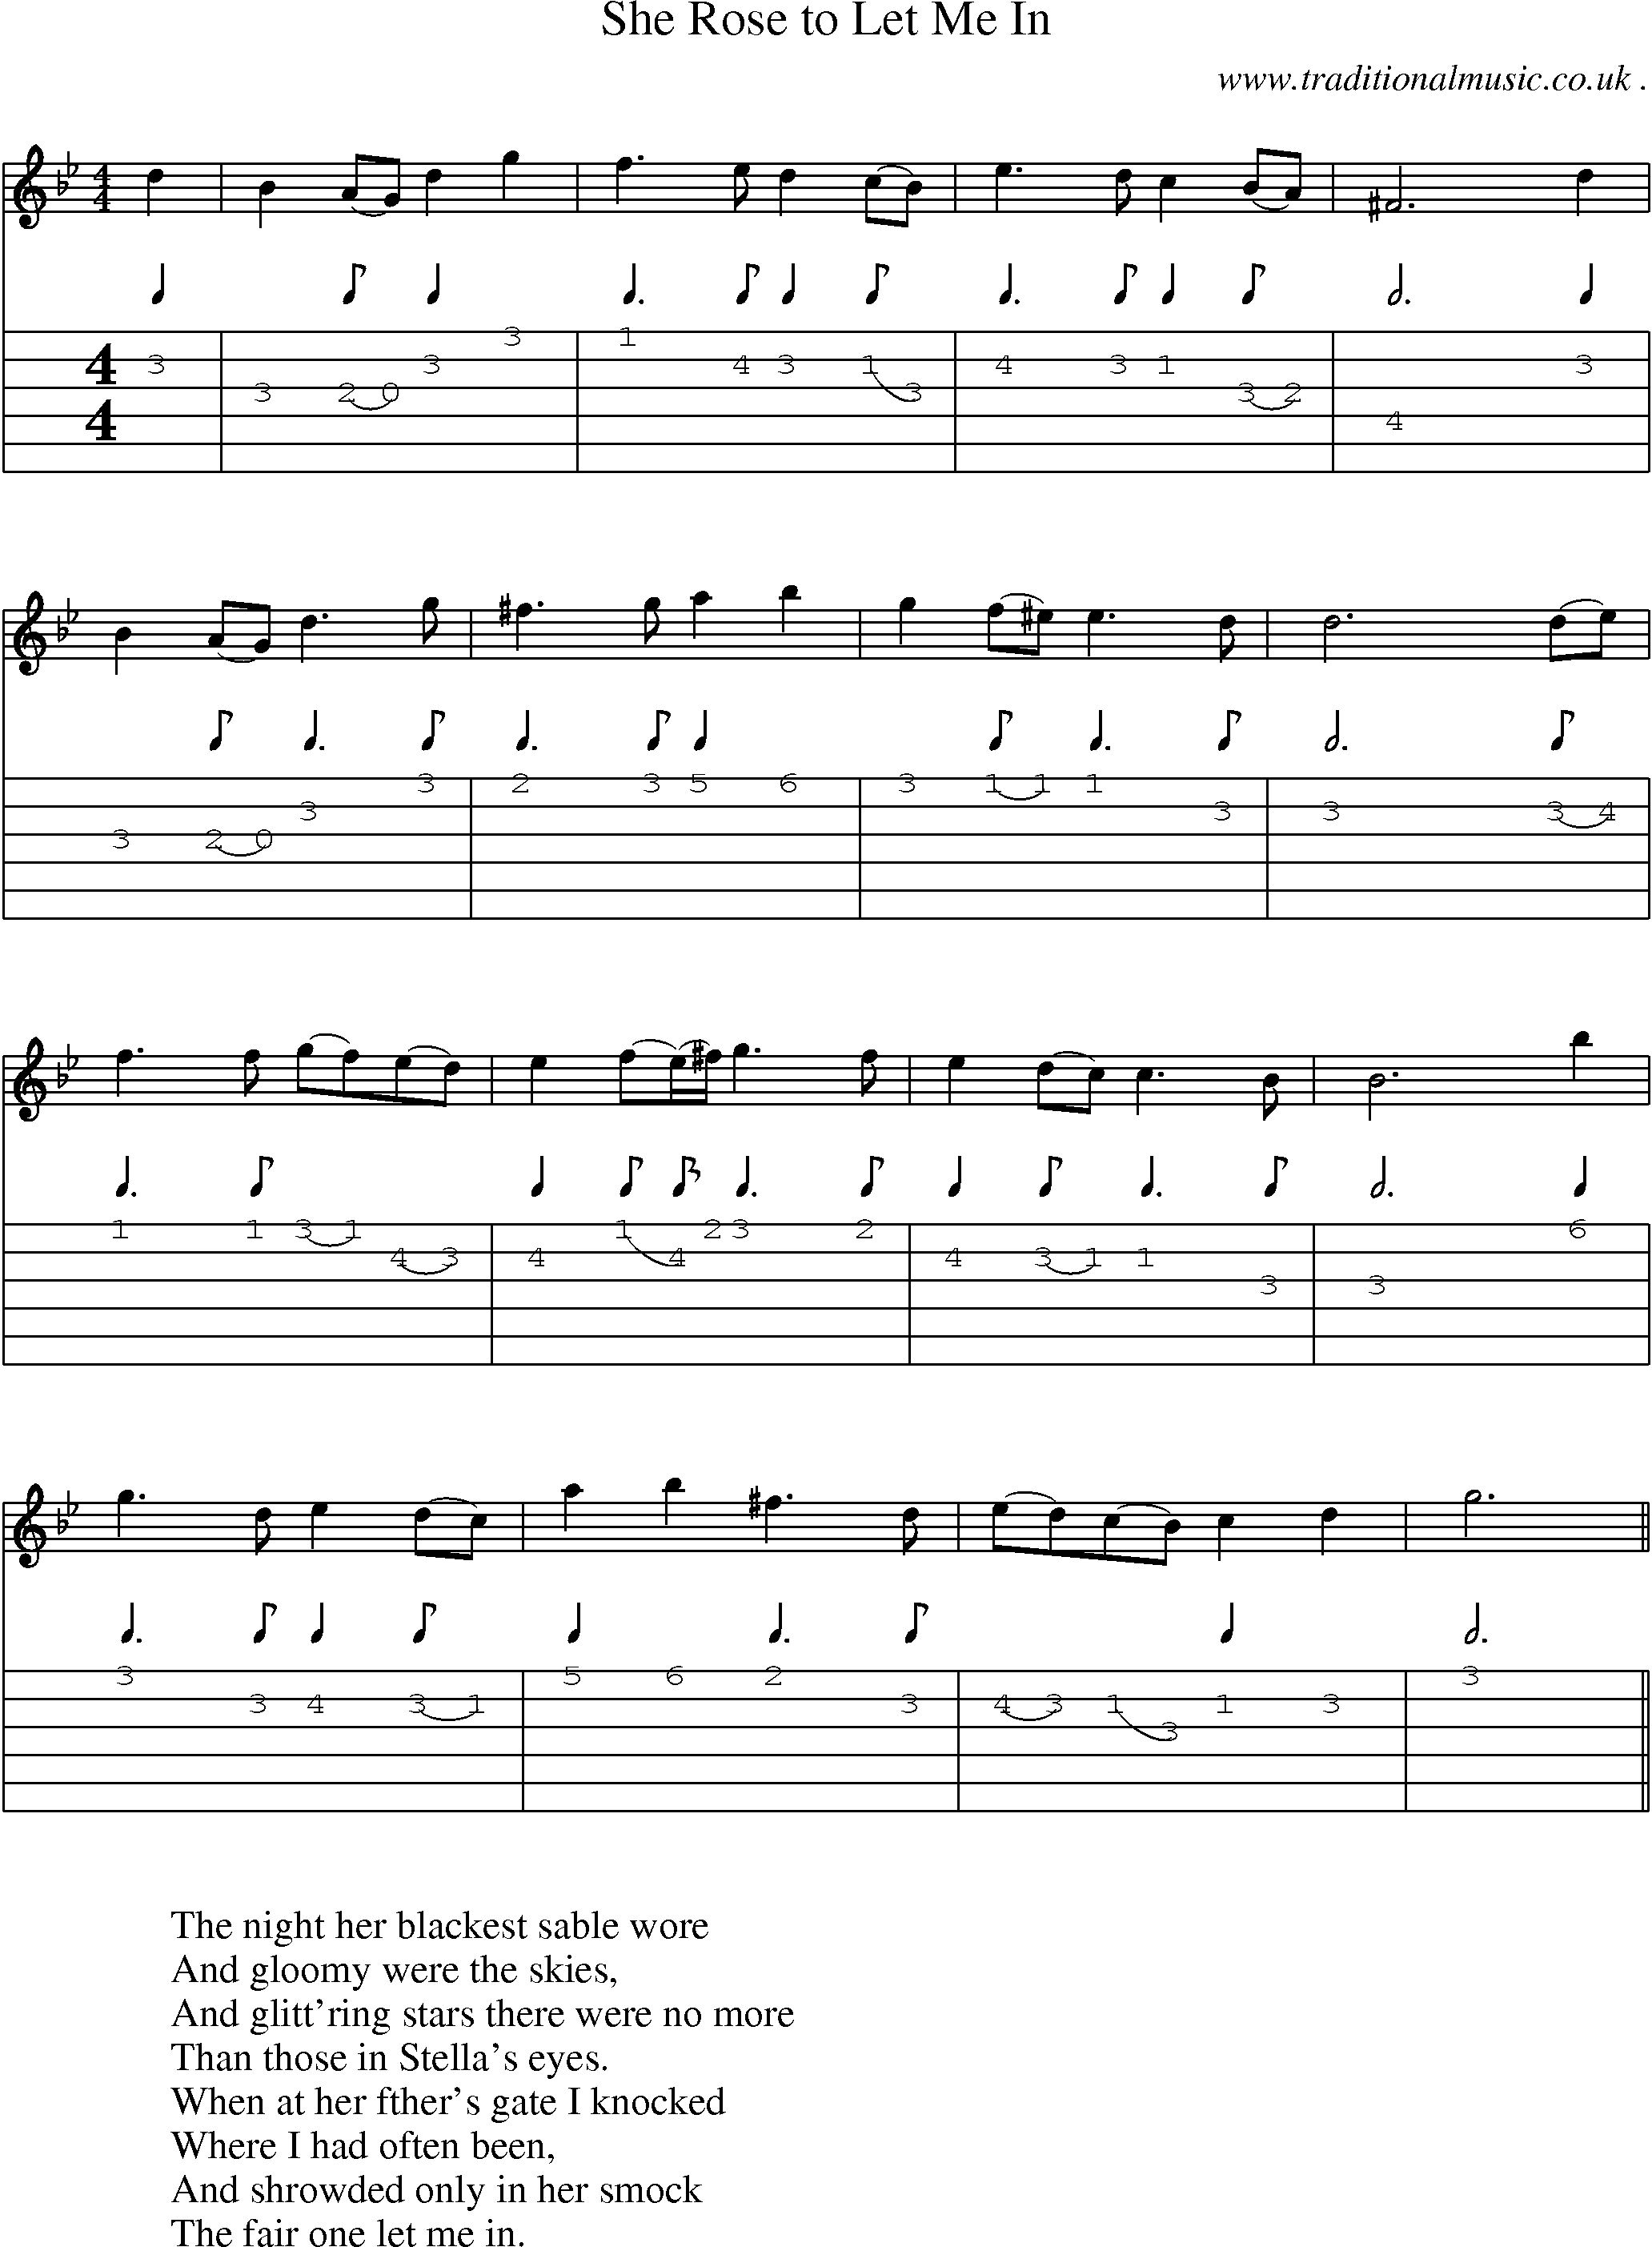 Sheet-Music and Guitar Tabs for She Rose To Let Me In